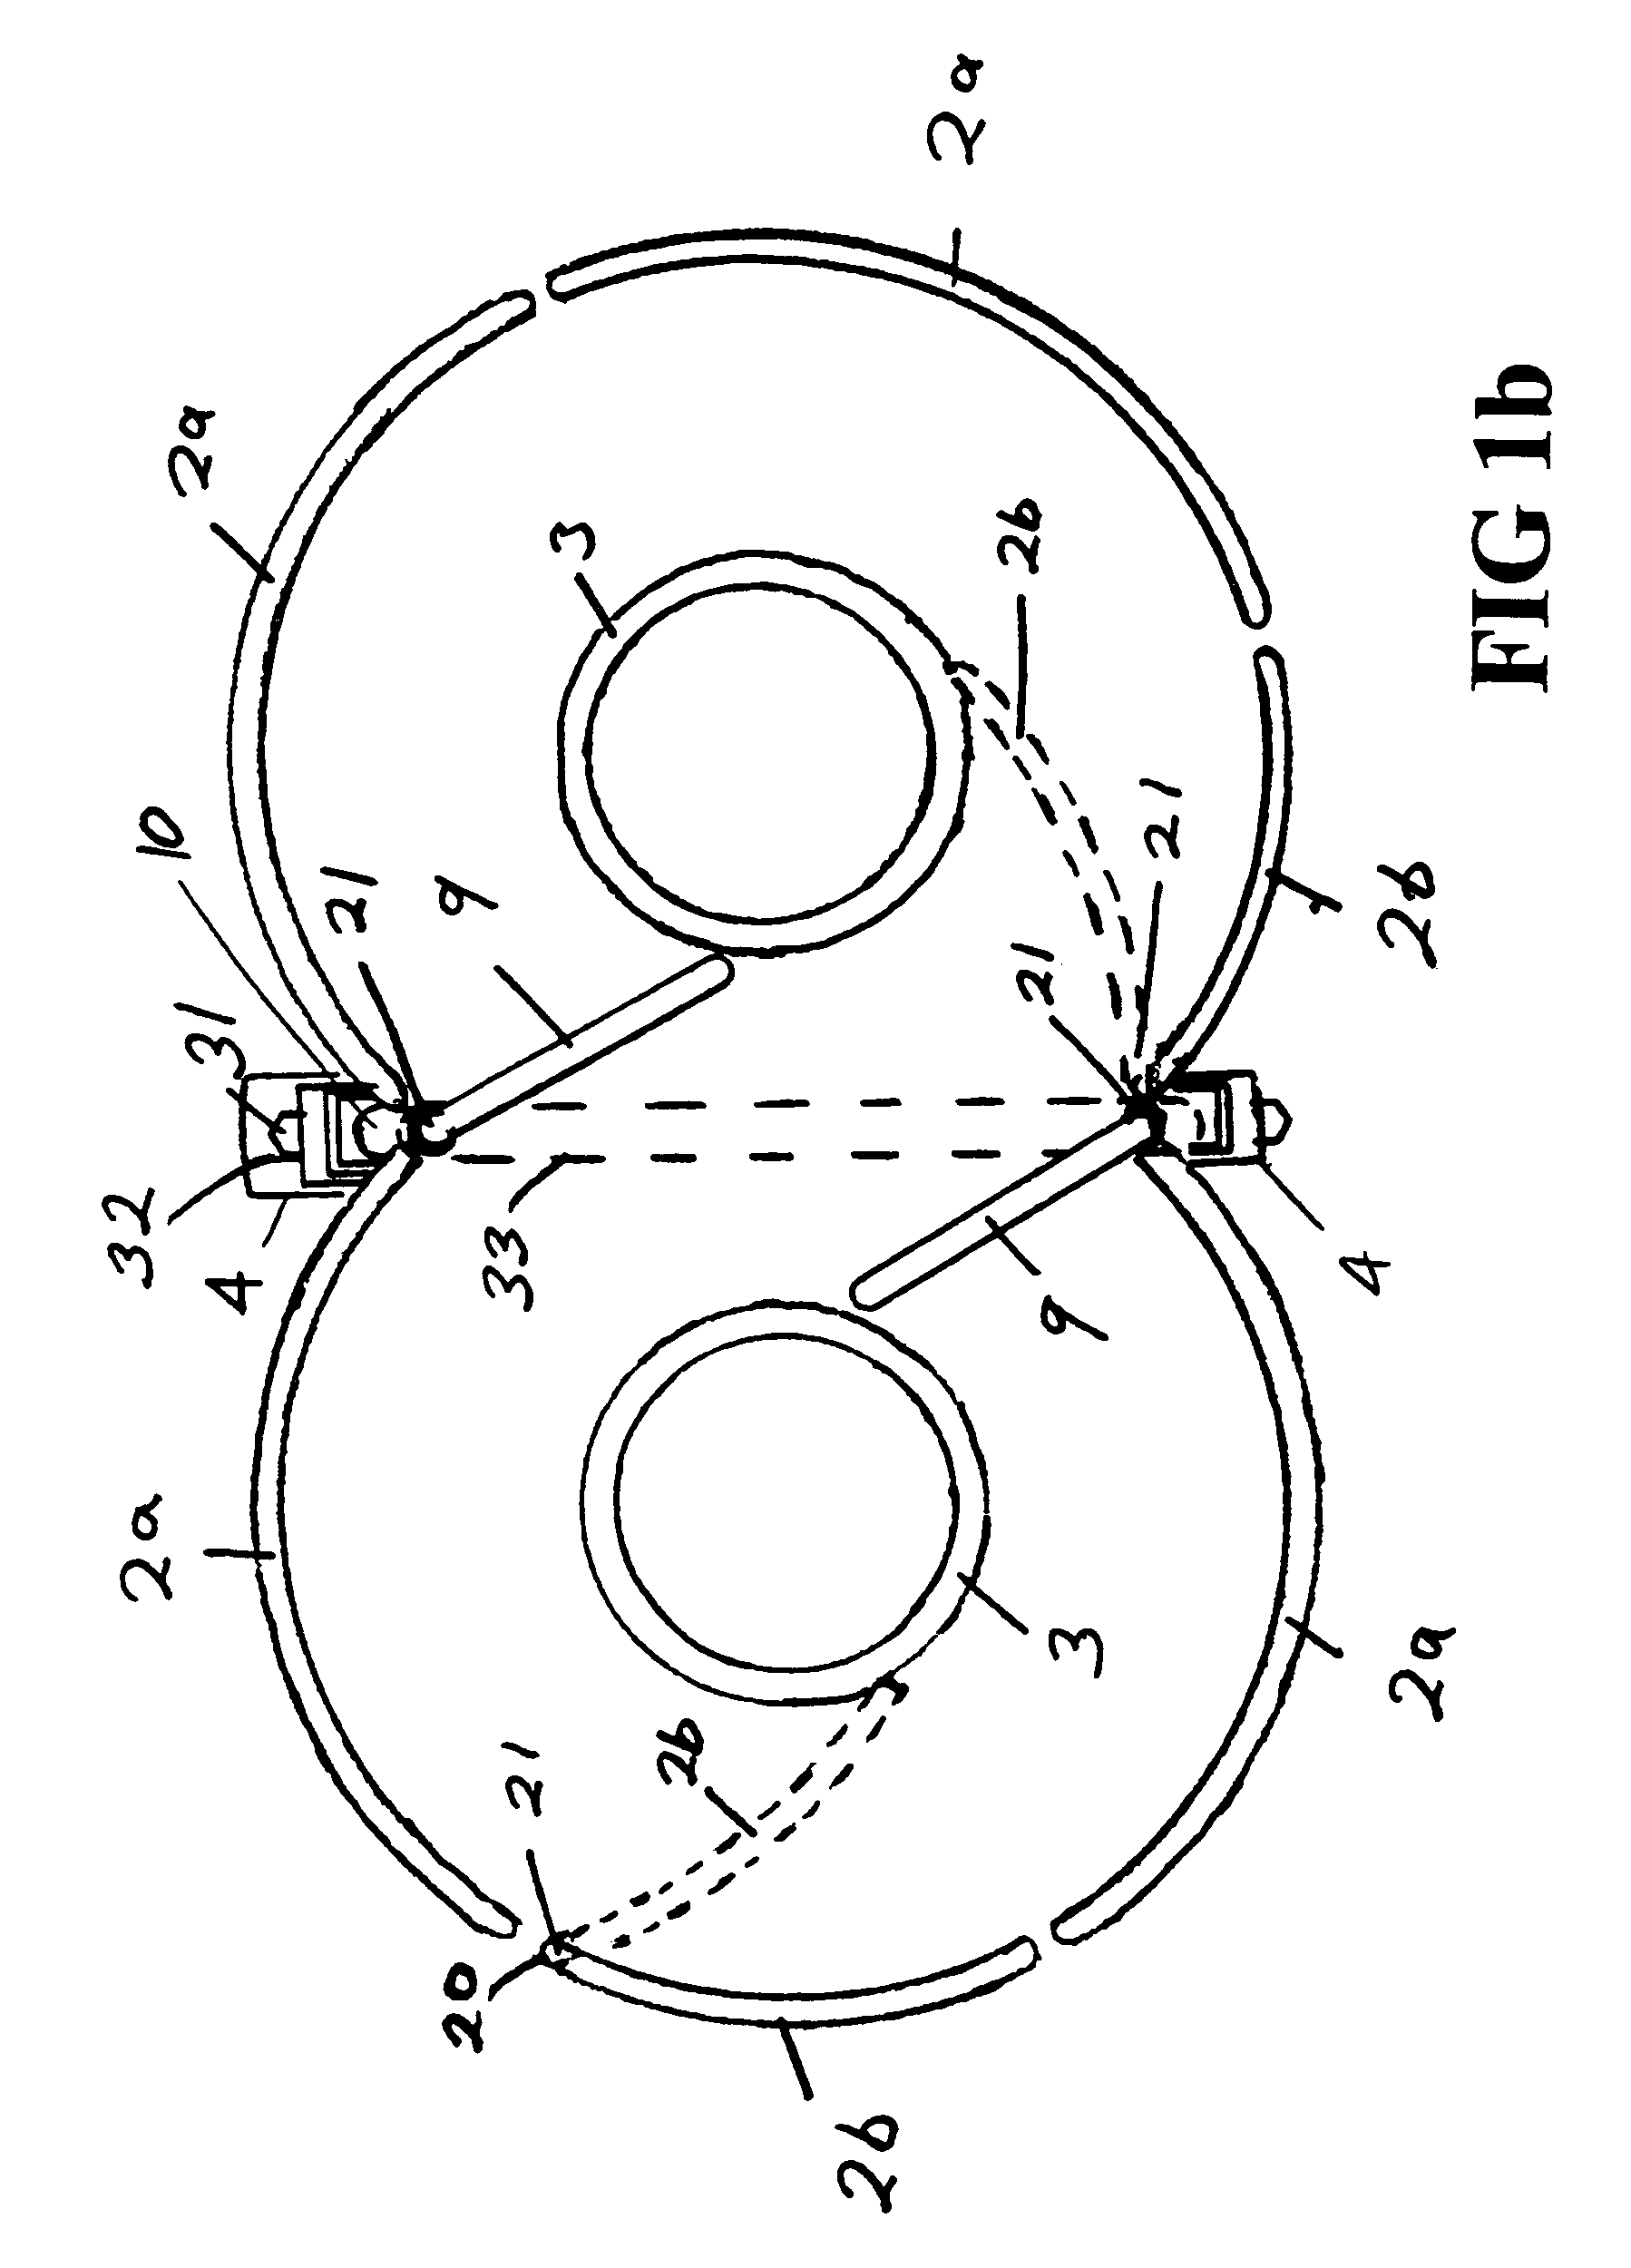 “Figure-eight” track, apparatus, method, and game for sensory-motor exercise